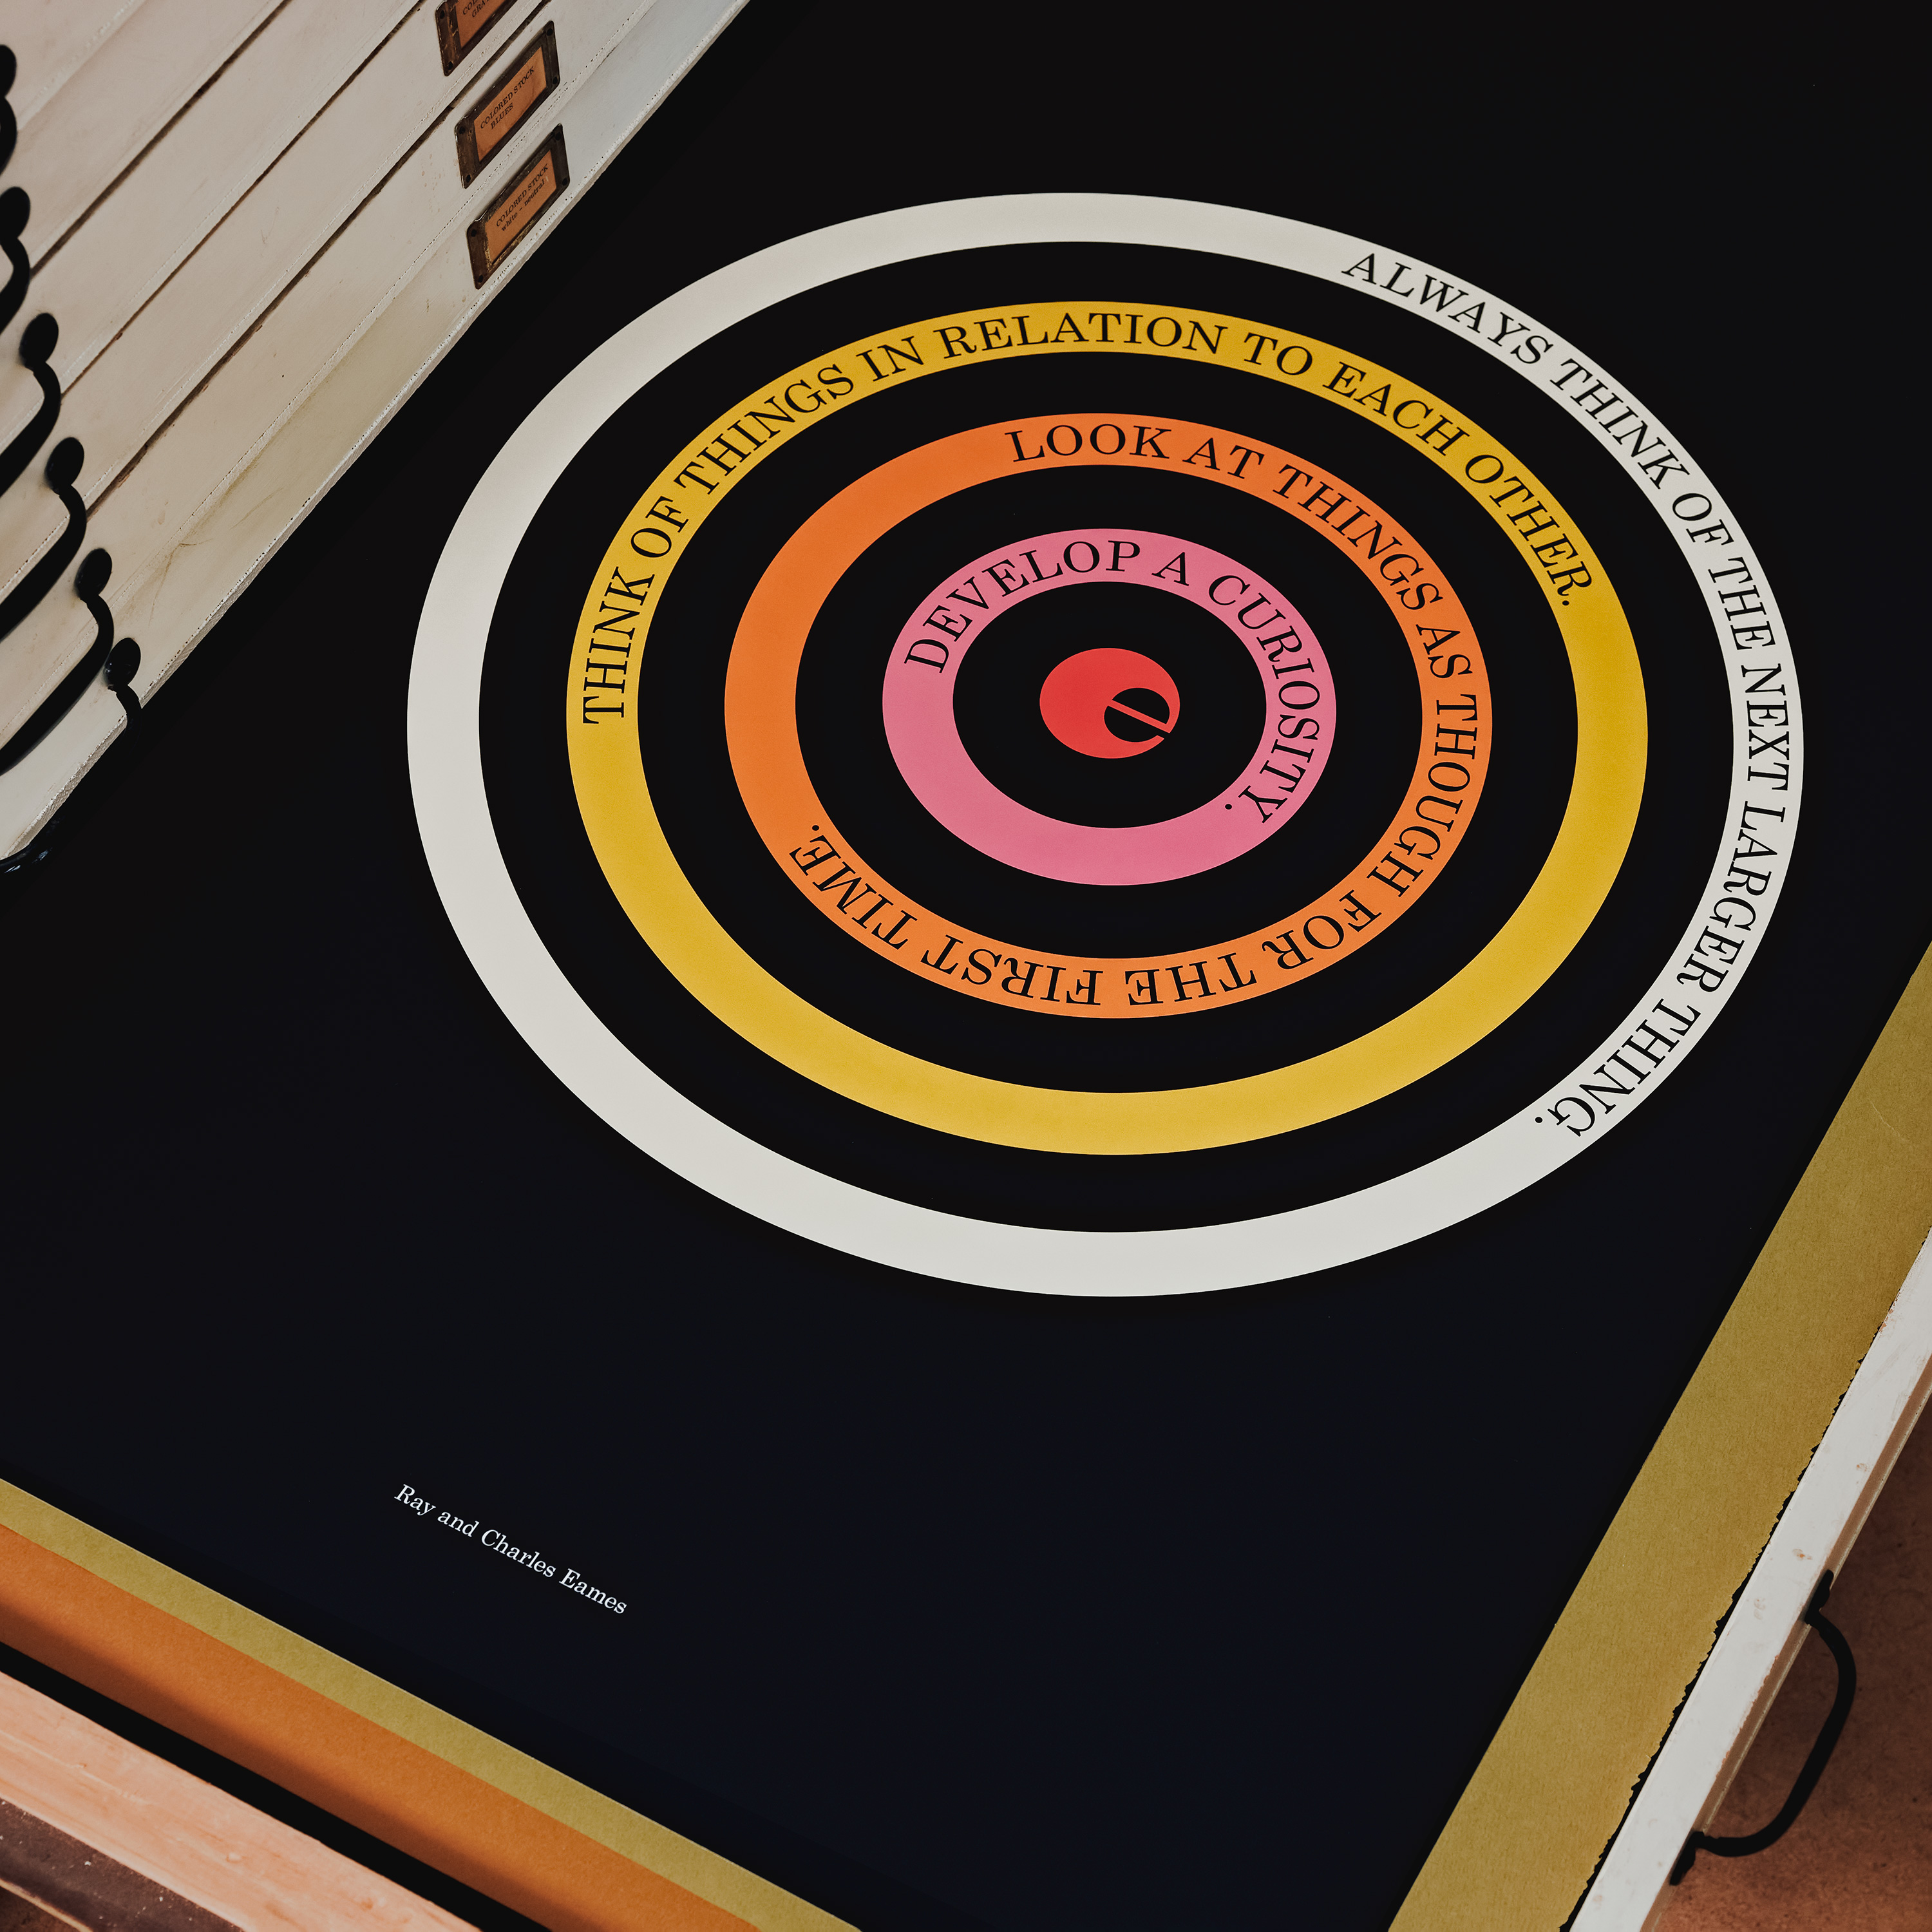 Poster designed by San Francisco-based studio Manual for The Eames Institute